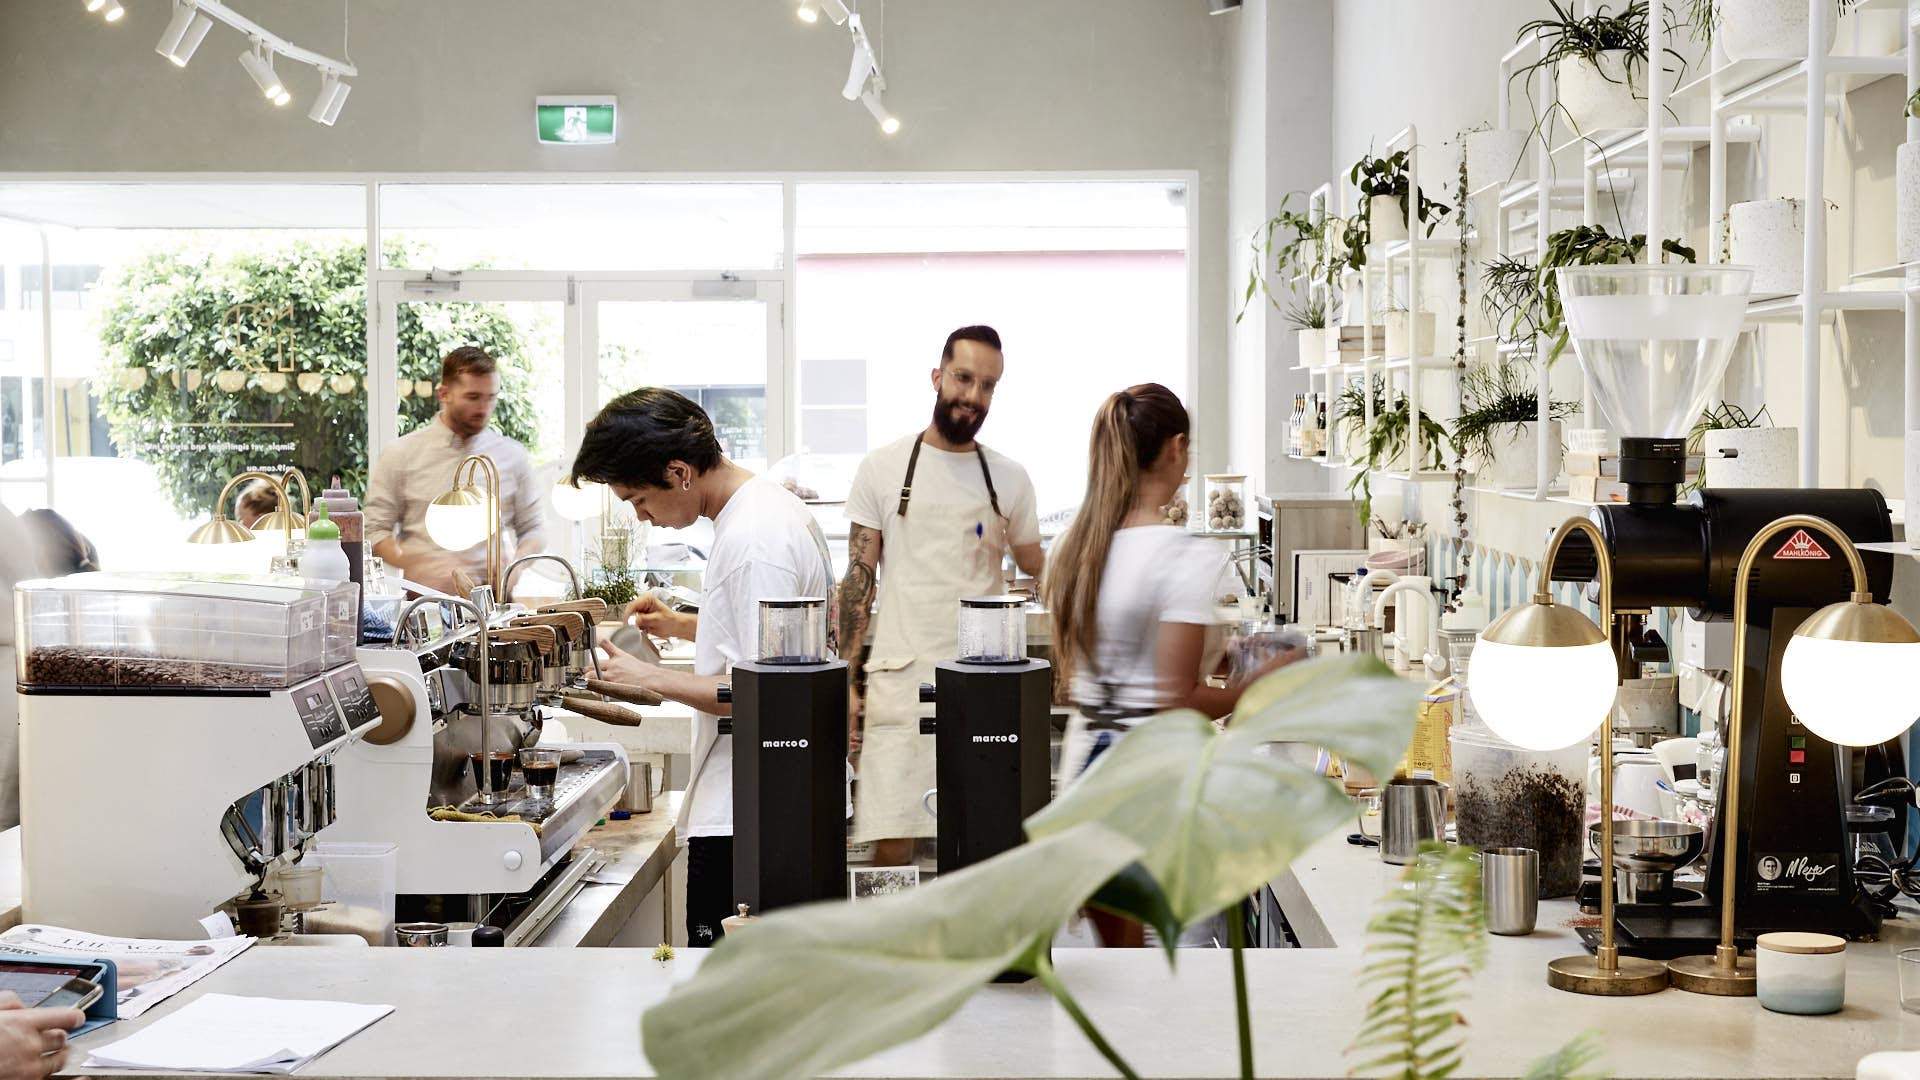 Key Tips on Opening an Attractive and Successful Cafe From the Brains Behind No. 19